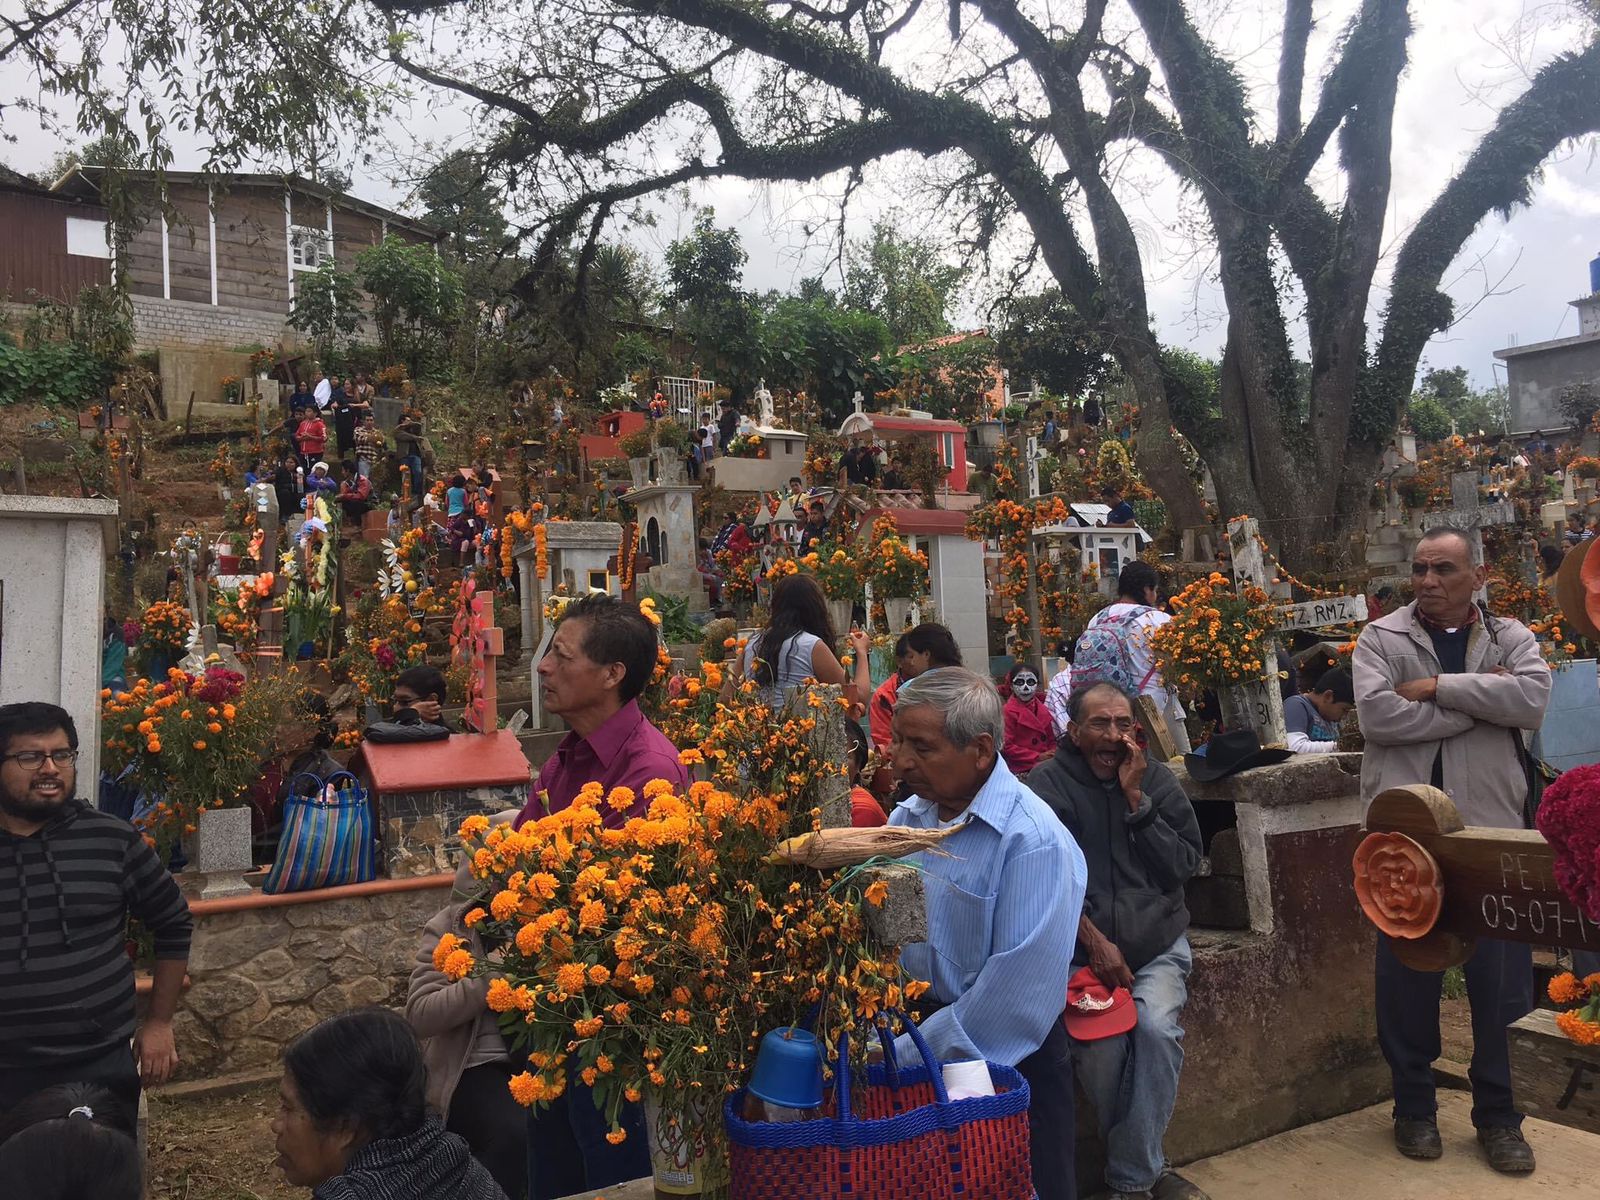 “Something is happening to the Day of the Dead” – It’s losing its identity